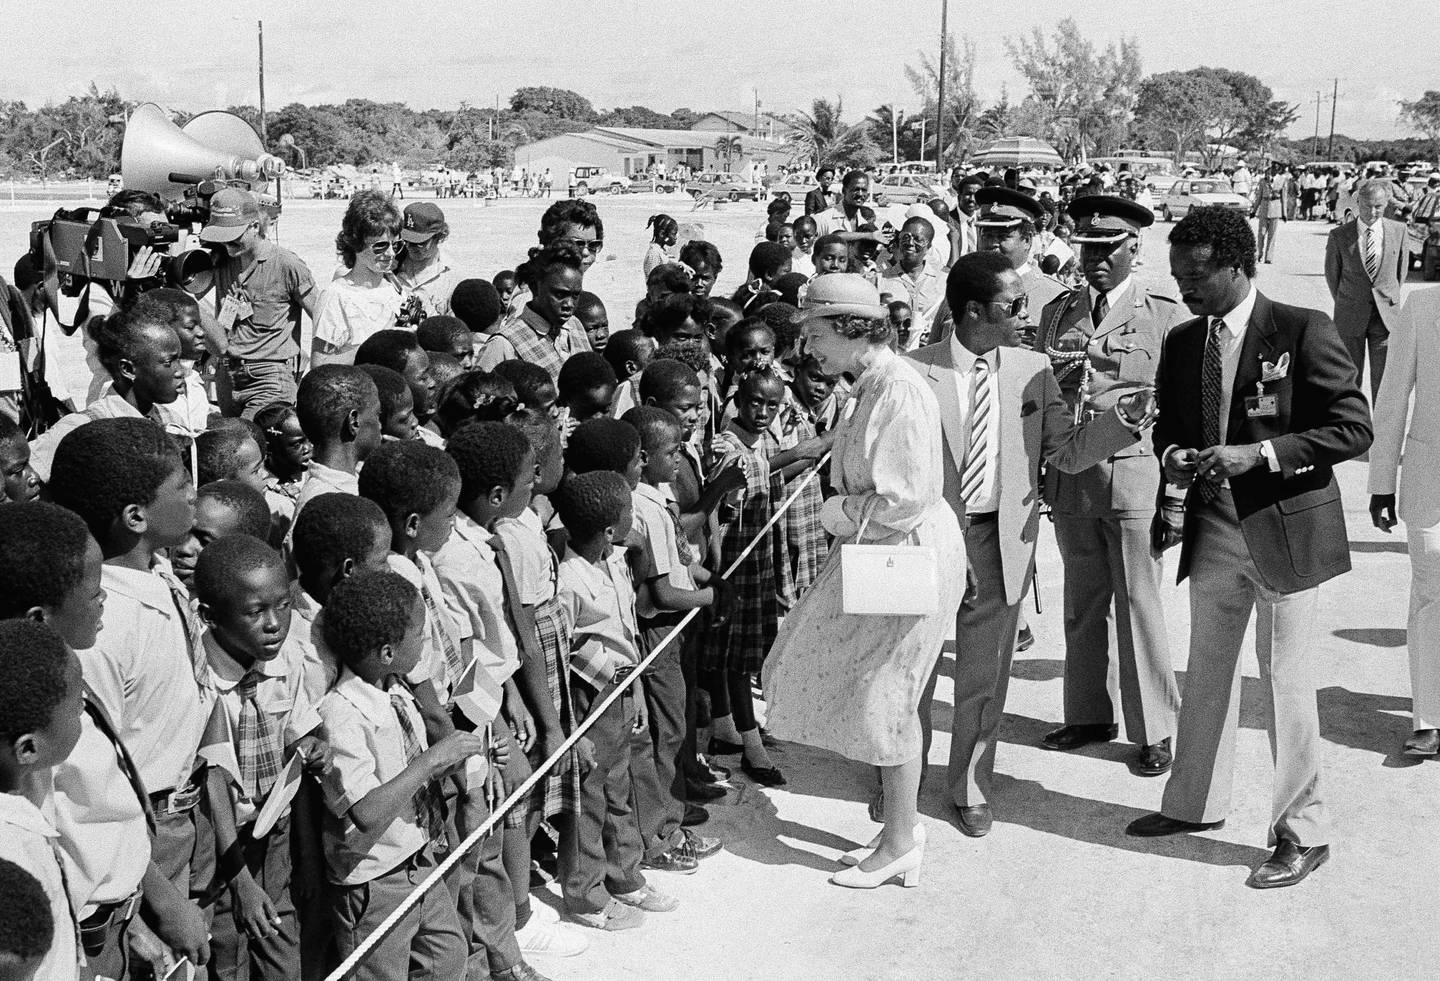 Her Majesty Queen Elizabeth II steps to the rope to meet school children of the Fresh Creek Primary School on Monday, Oct. 14, 1985 in Andros, The Bahamas.  She officially opened the newly completed sporting facility in Fresh Creek.    The Queen is on a tour of the Commonwealth Islands in the Bahamas. (AP Photo/Barry Thumma)